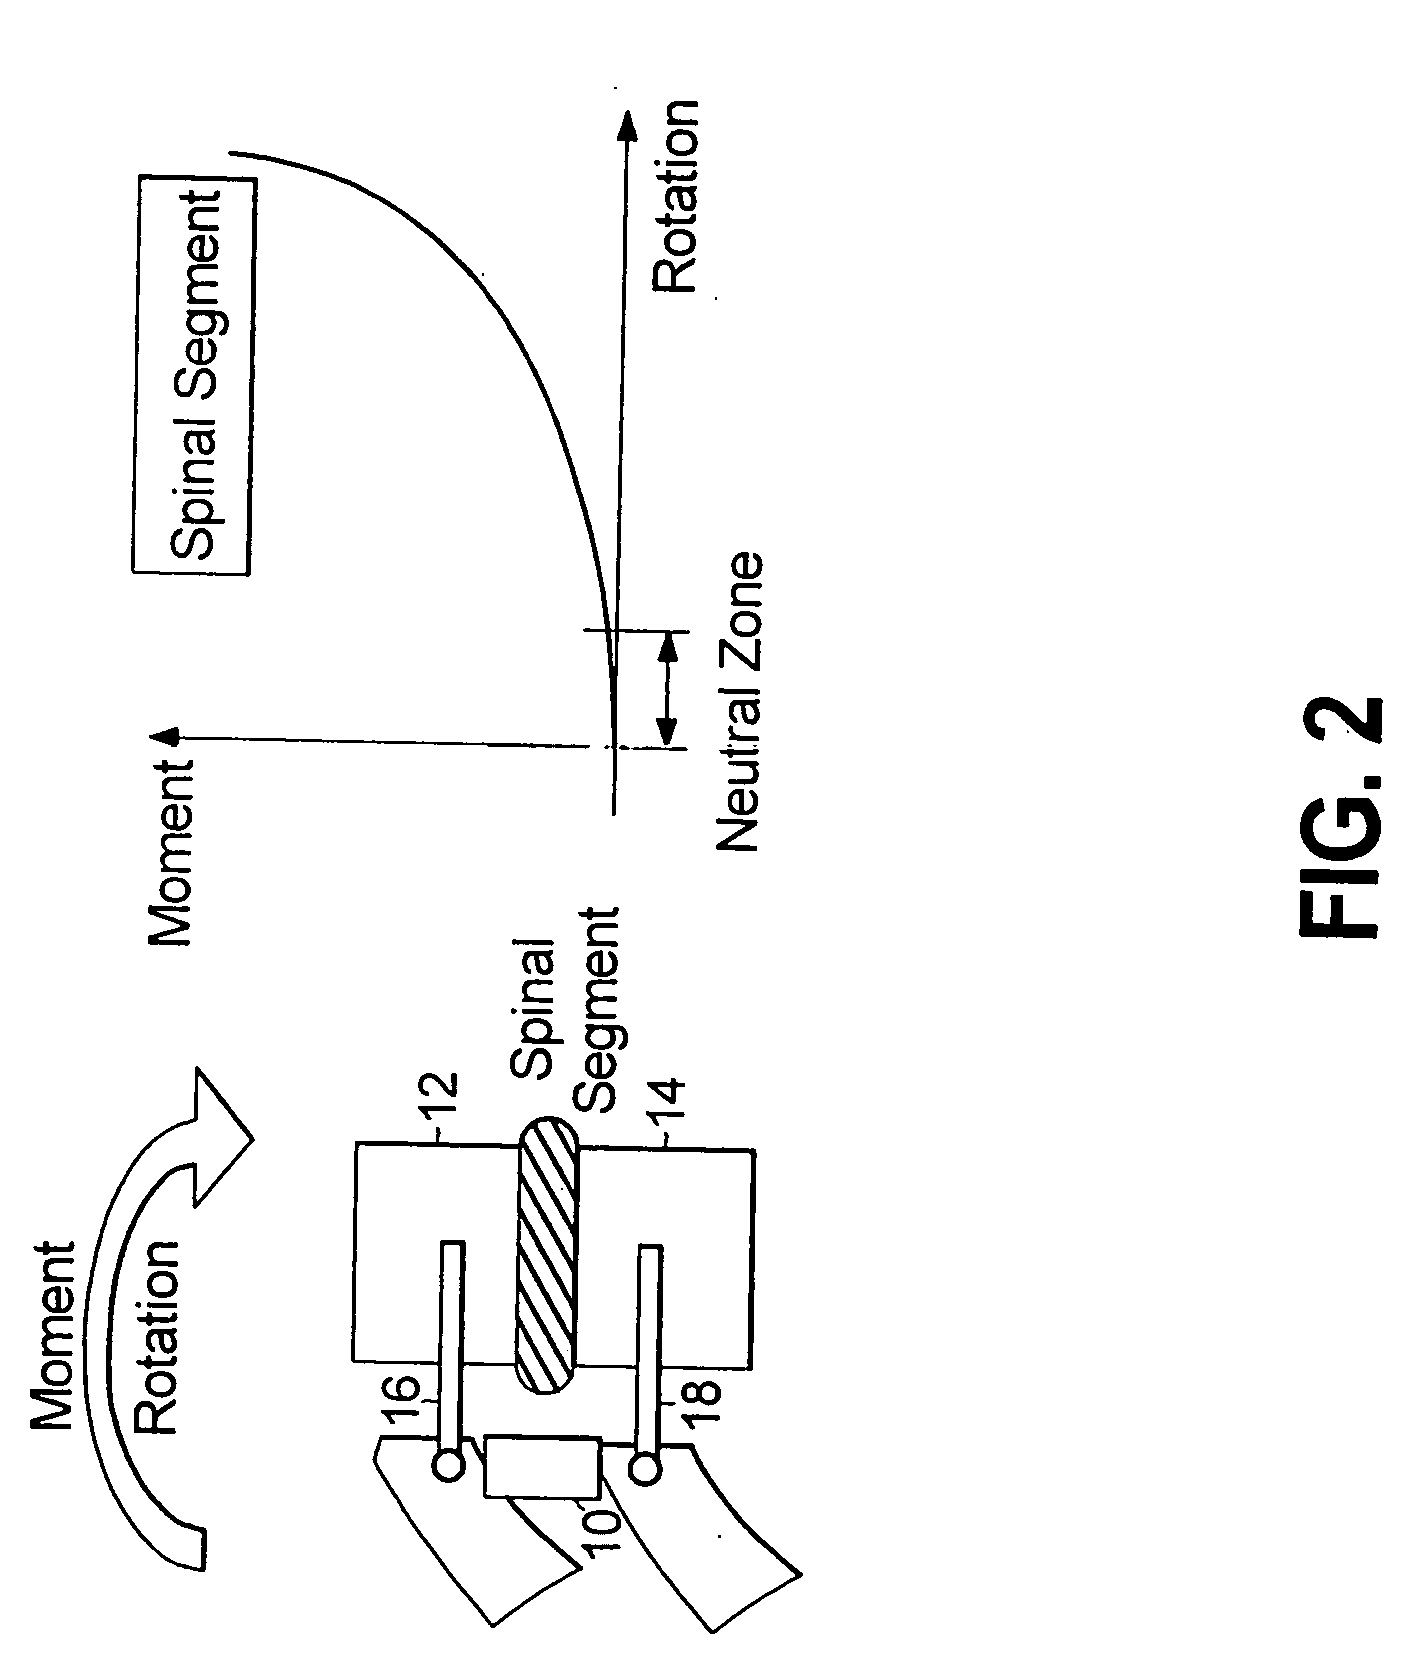 Systems and methods accommodating relative motion in spine stabilization